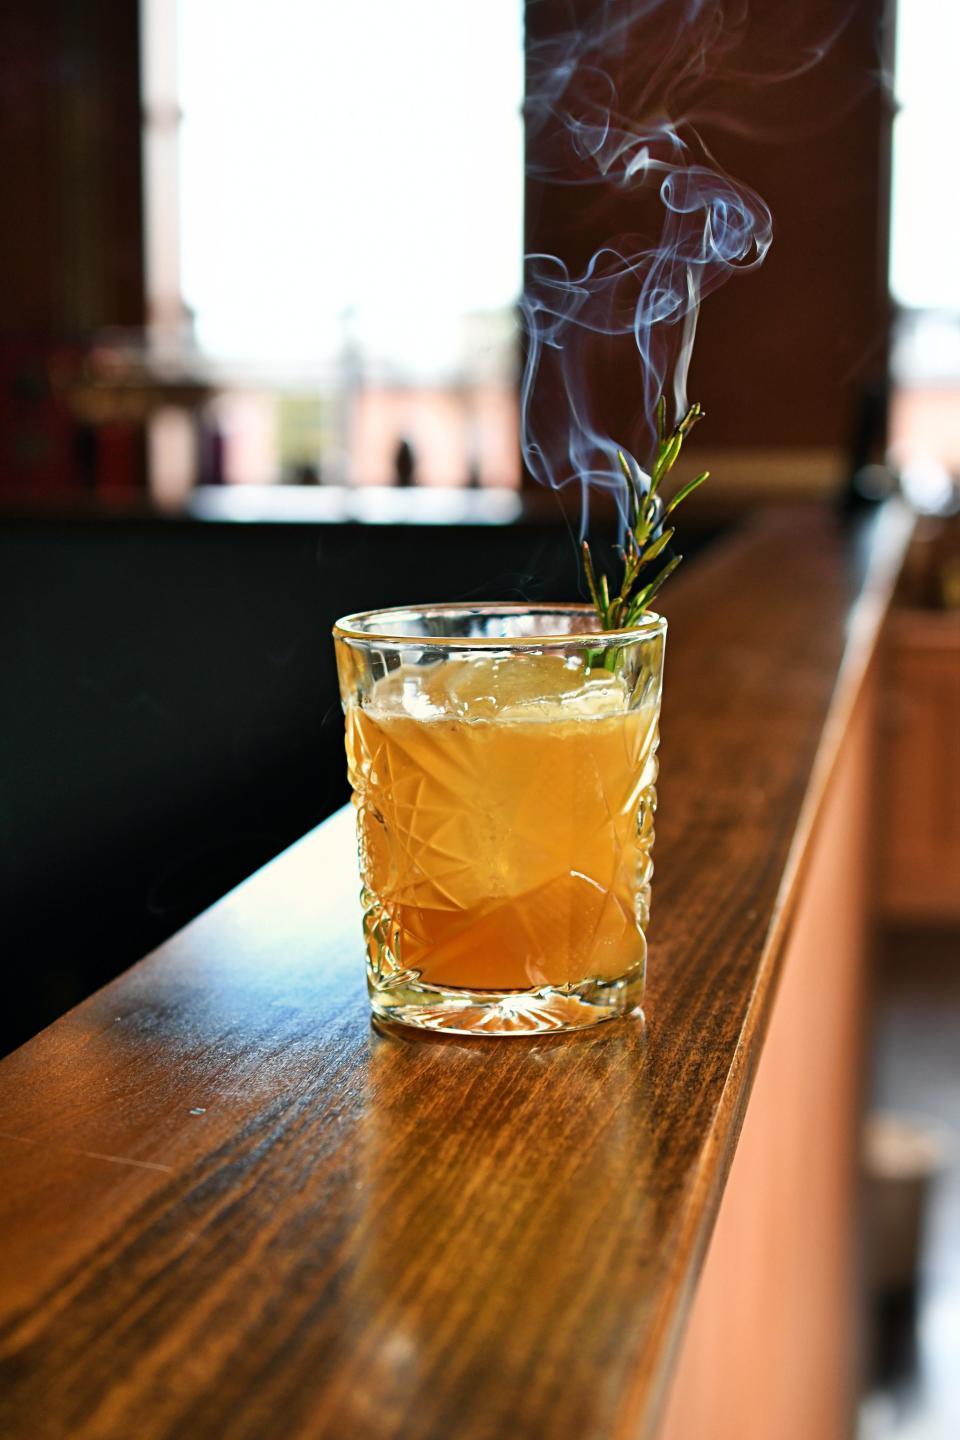 Charred rosemary adds serious aromatics to Barred Owl's Sweater Weather drink.